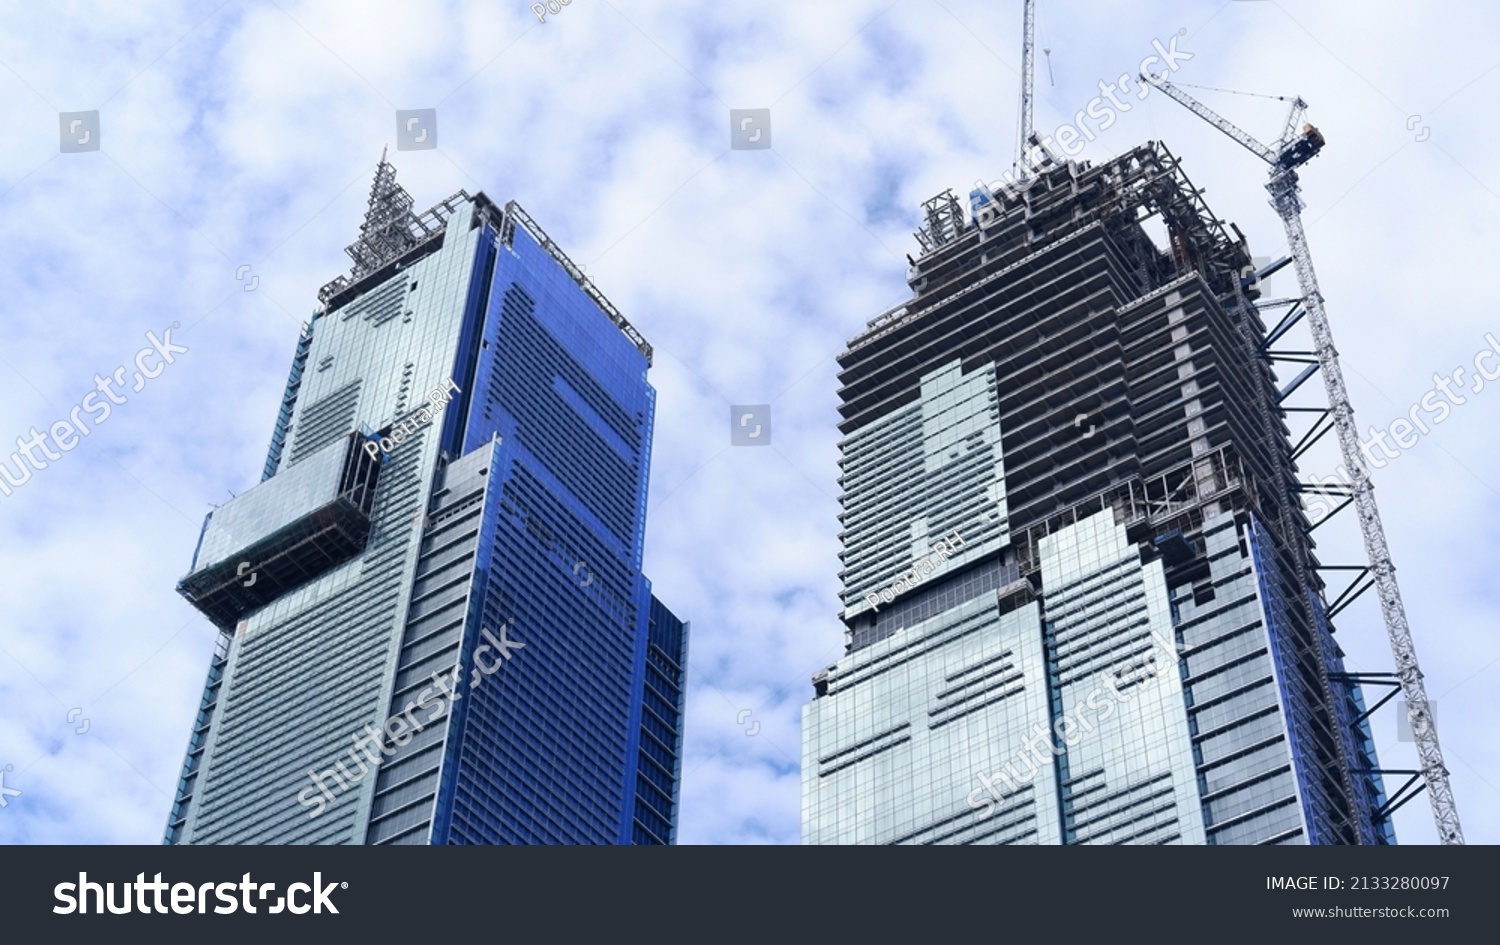 Skyscraper building under construction with tower crane and blue sky background  #2133280097